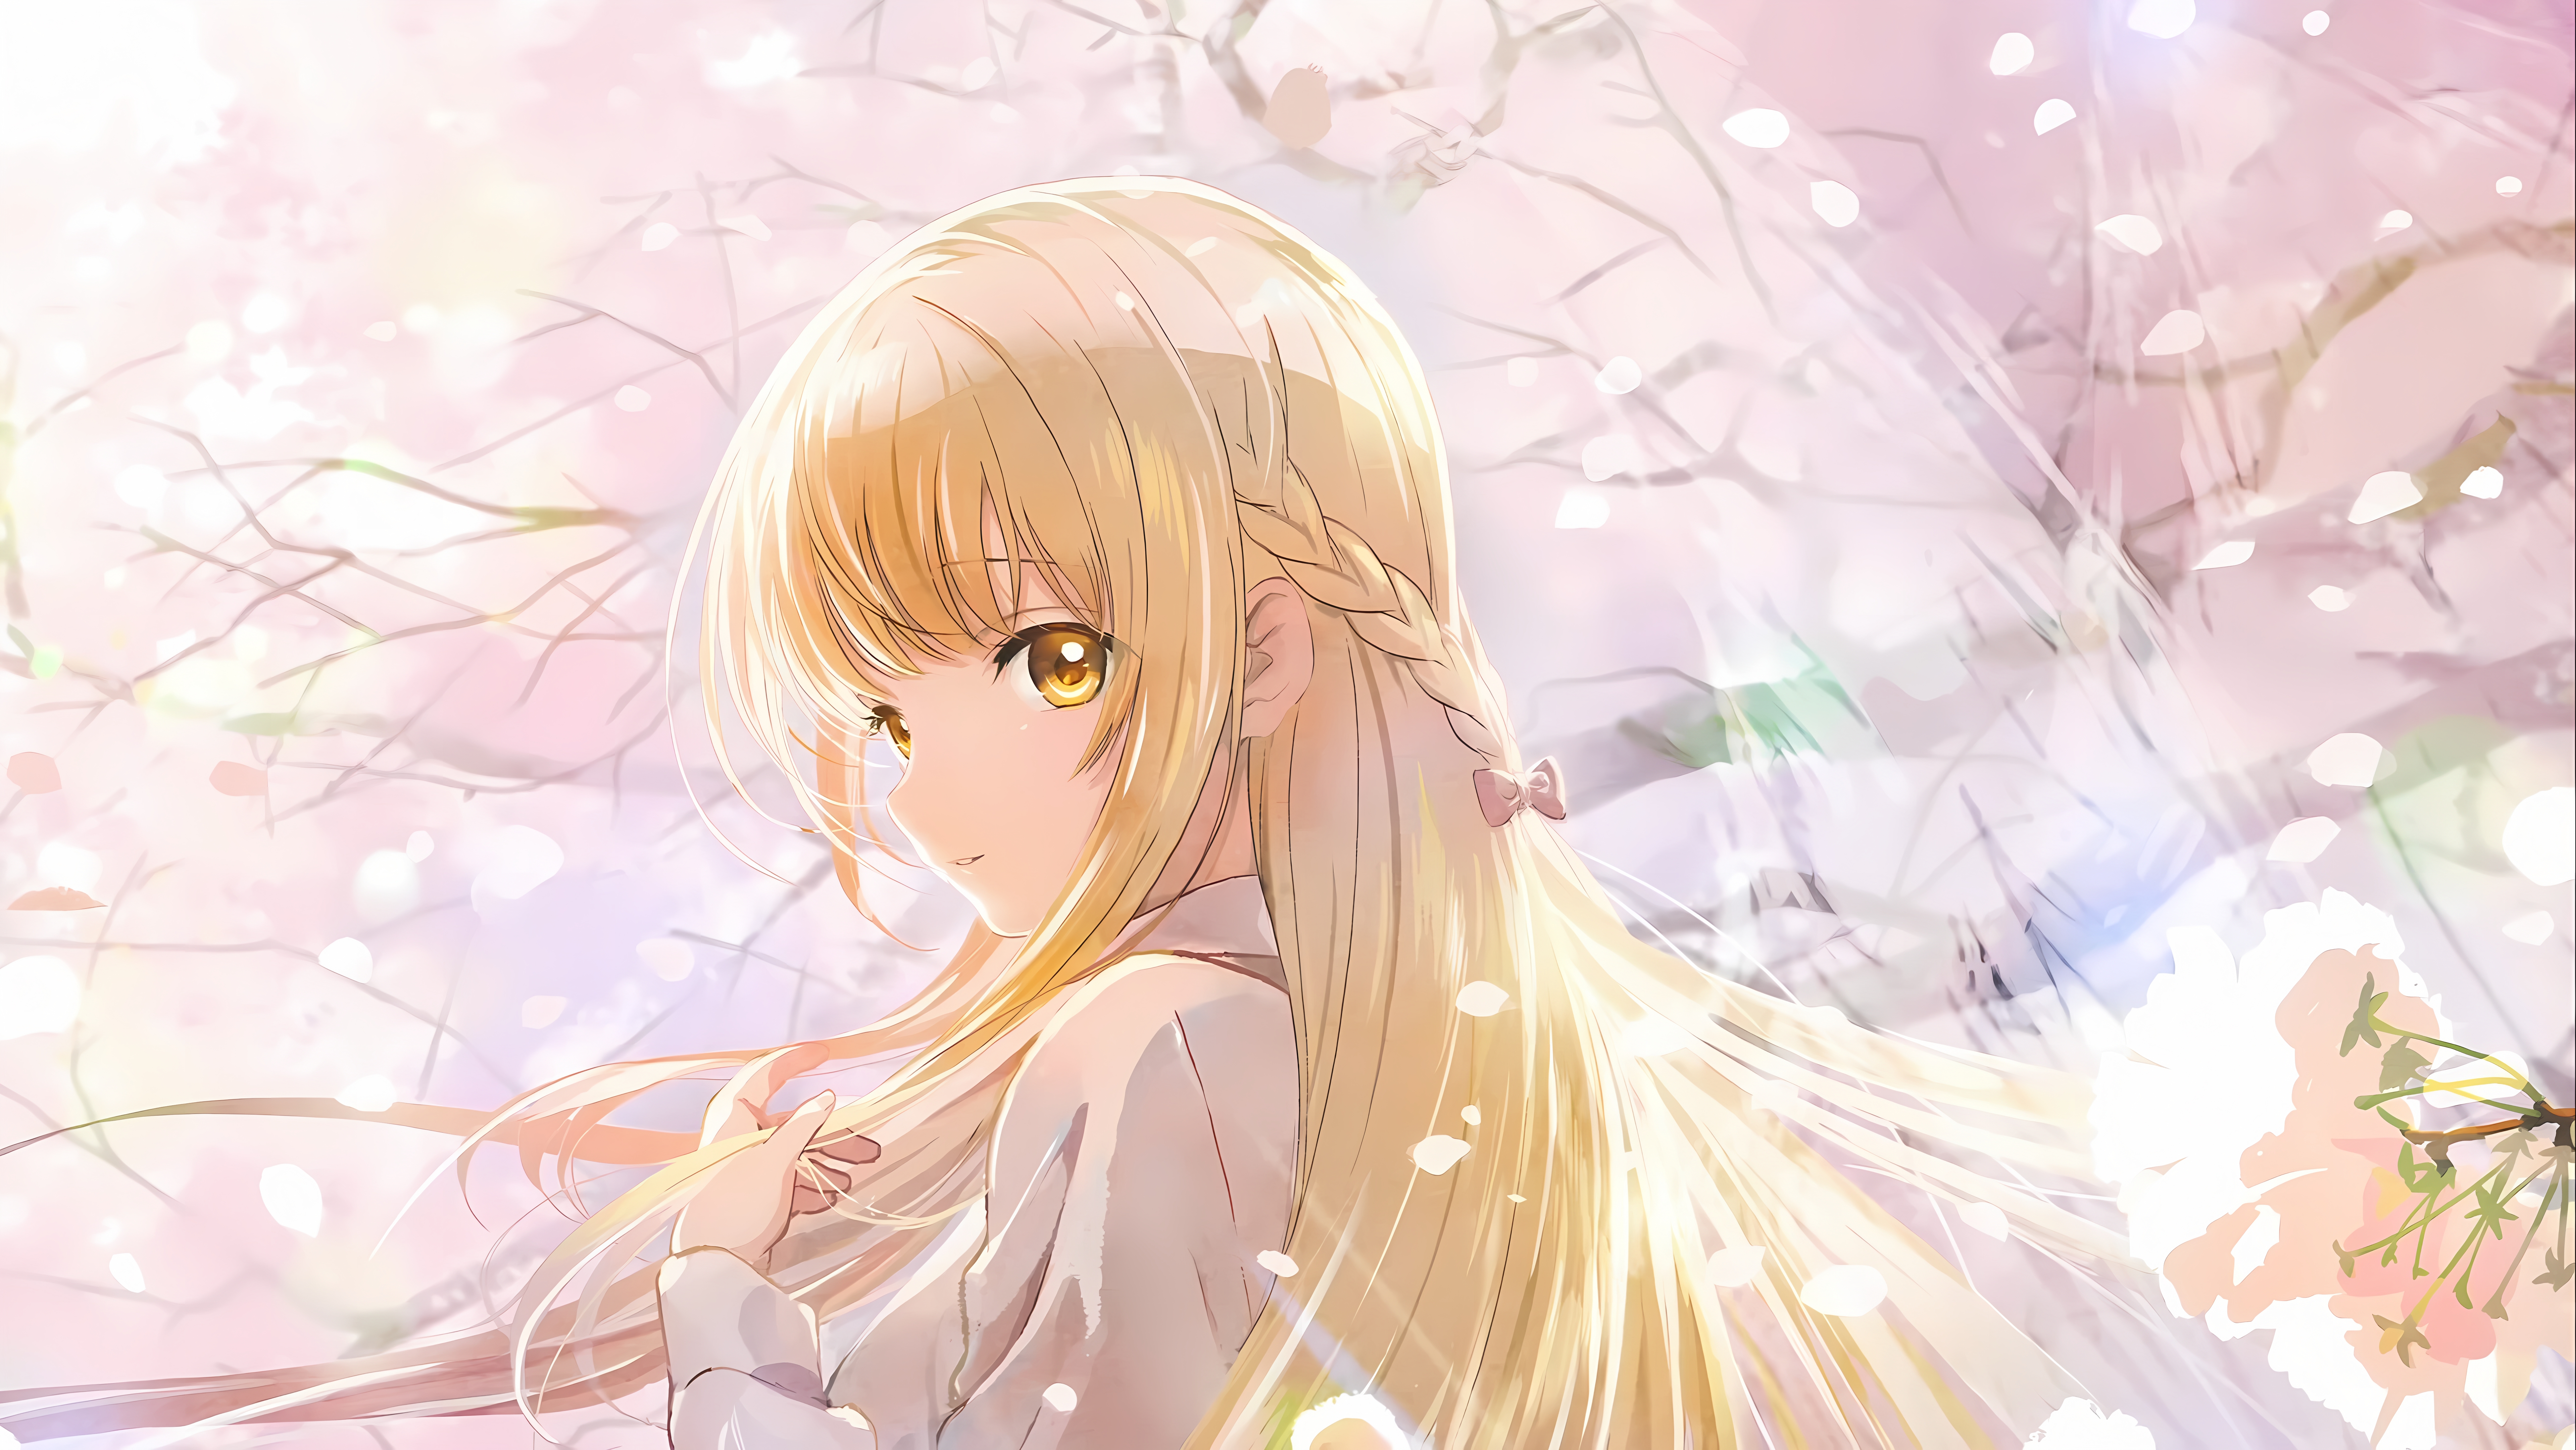 Mahiru Shiina from The Angel Next Door Spoils Me Rotten in anime style, showcased as a vibrant and detailed HD desktop wallpaper and background.